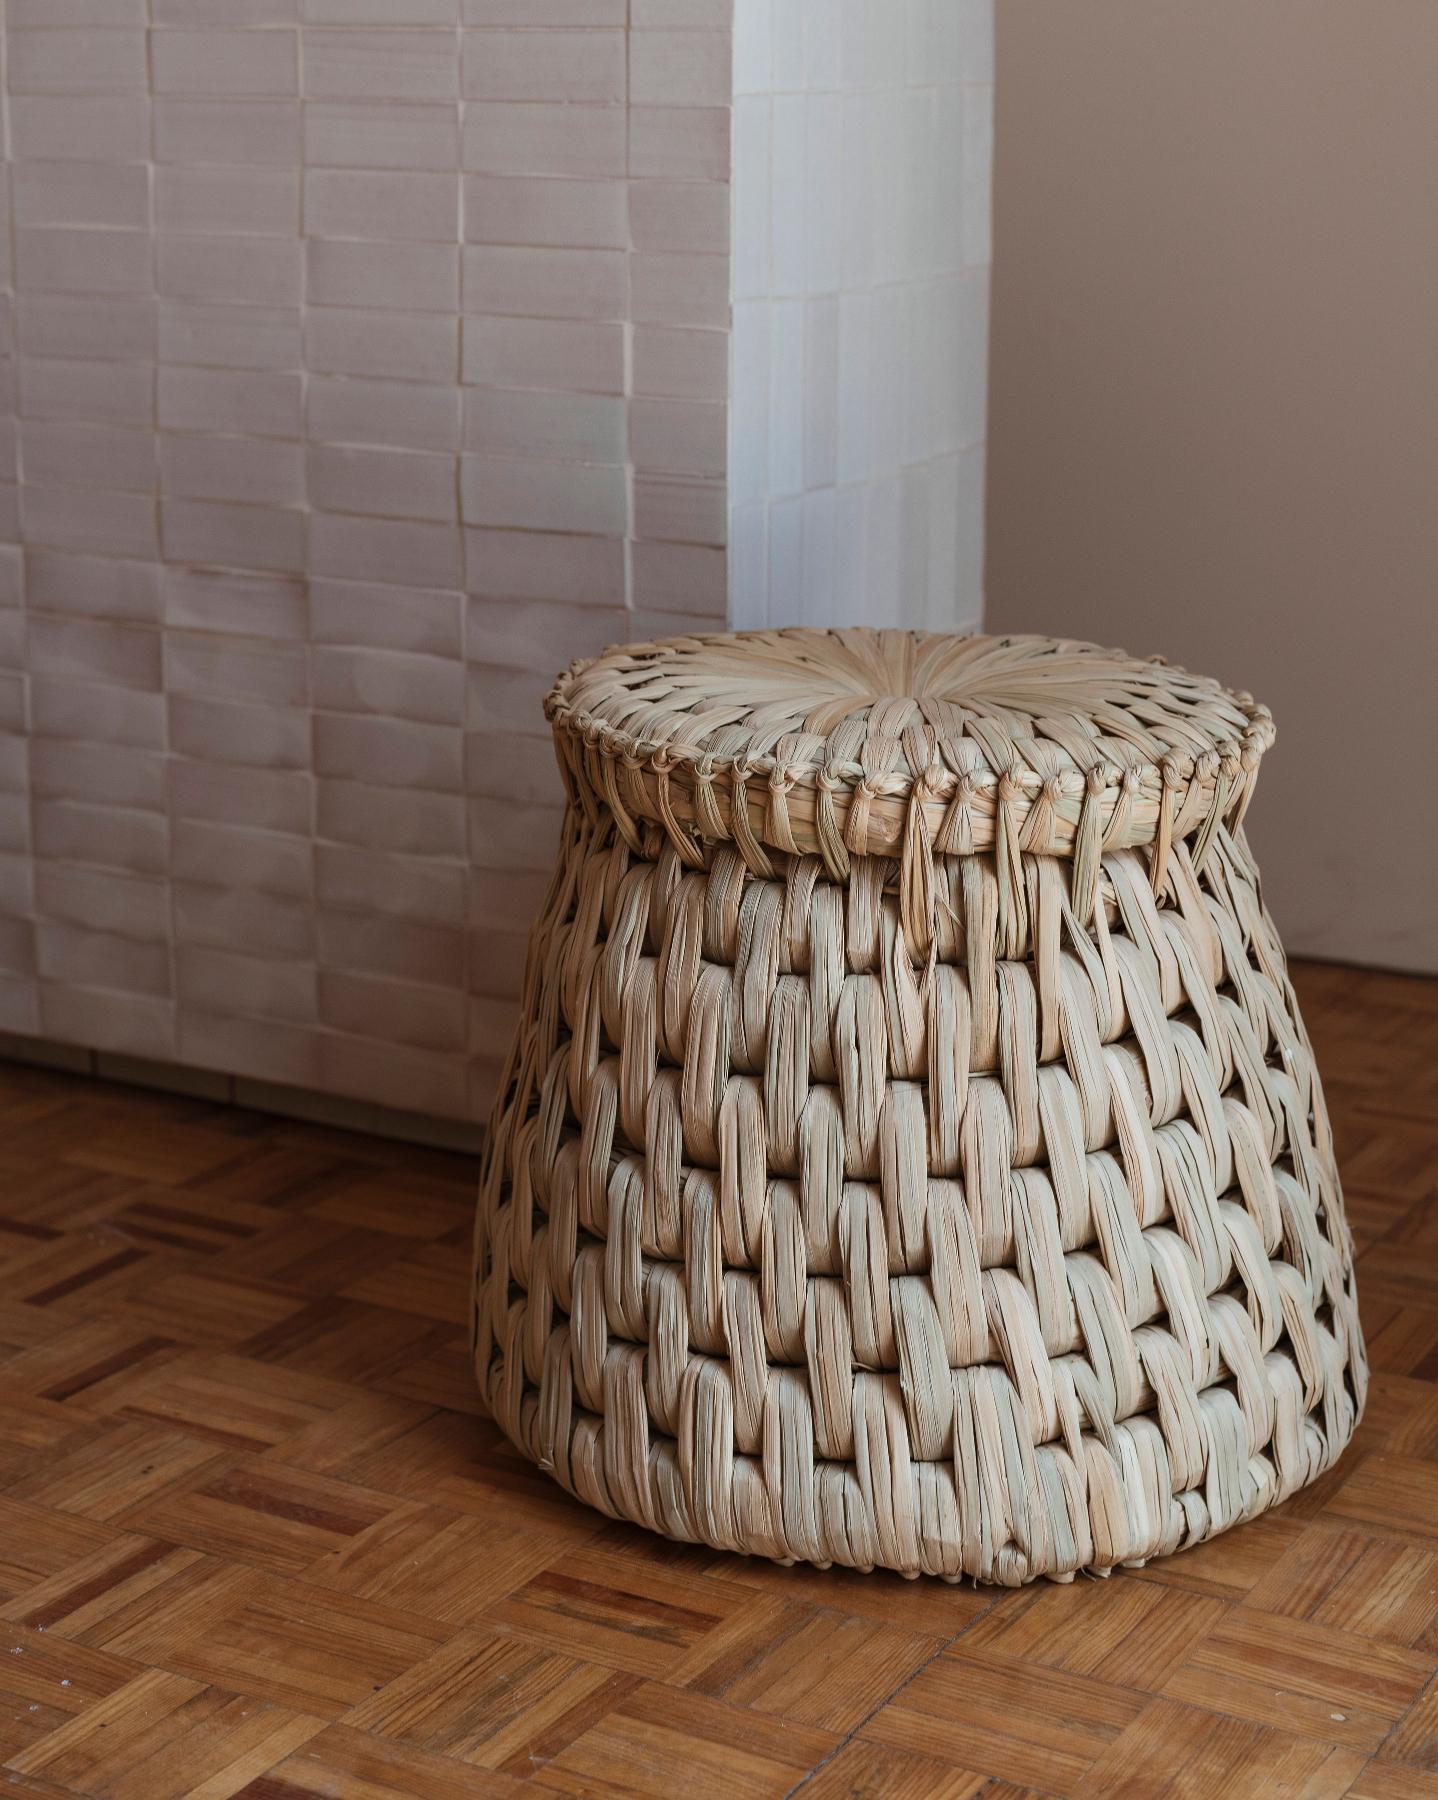 txt.13 Stool by Txt.Ure
Dimensions: Ø 56 x H 50 cm.
Materials: Tulle natural fiber with natural finish.

For indoor and outdoor use (under covered spaces). Please contact us.

Txt. ure was the first design project to reintroduce the Mexican weaving